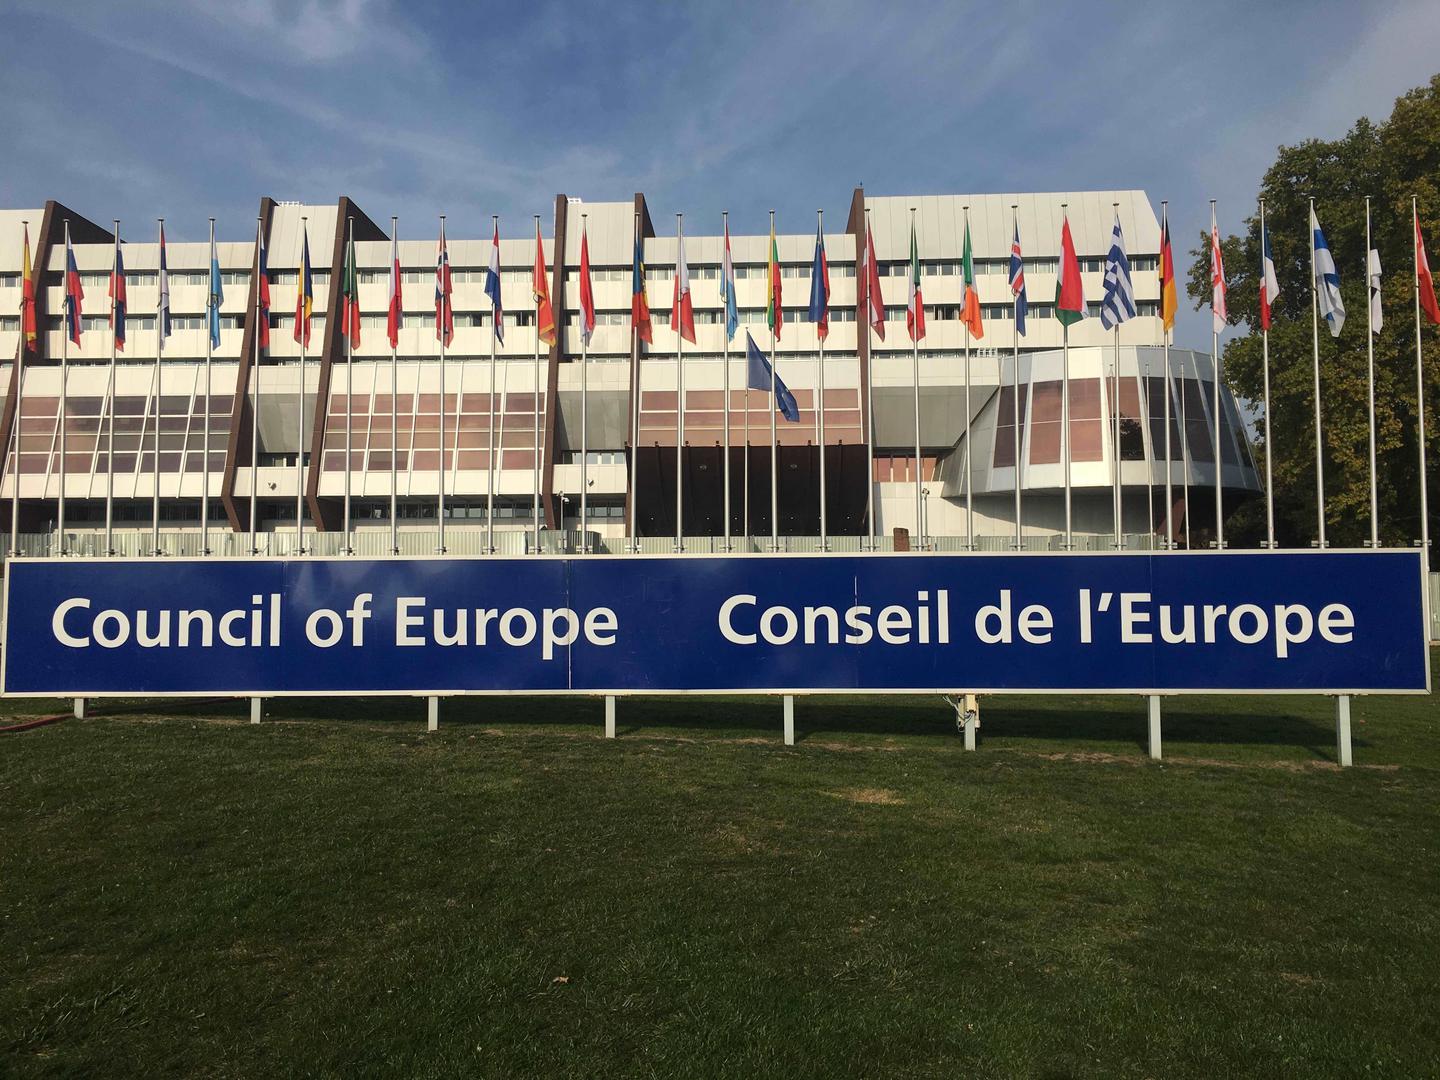 The headquarters of the Council of Europe in Strasbourg